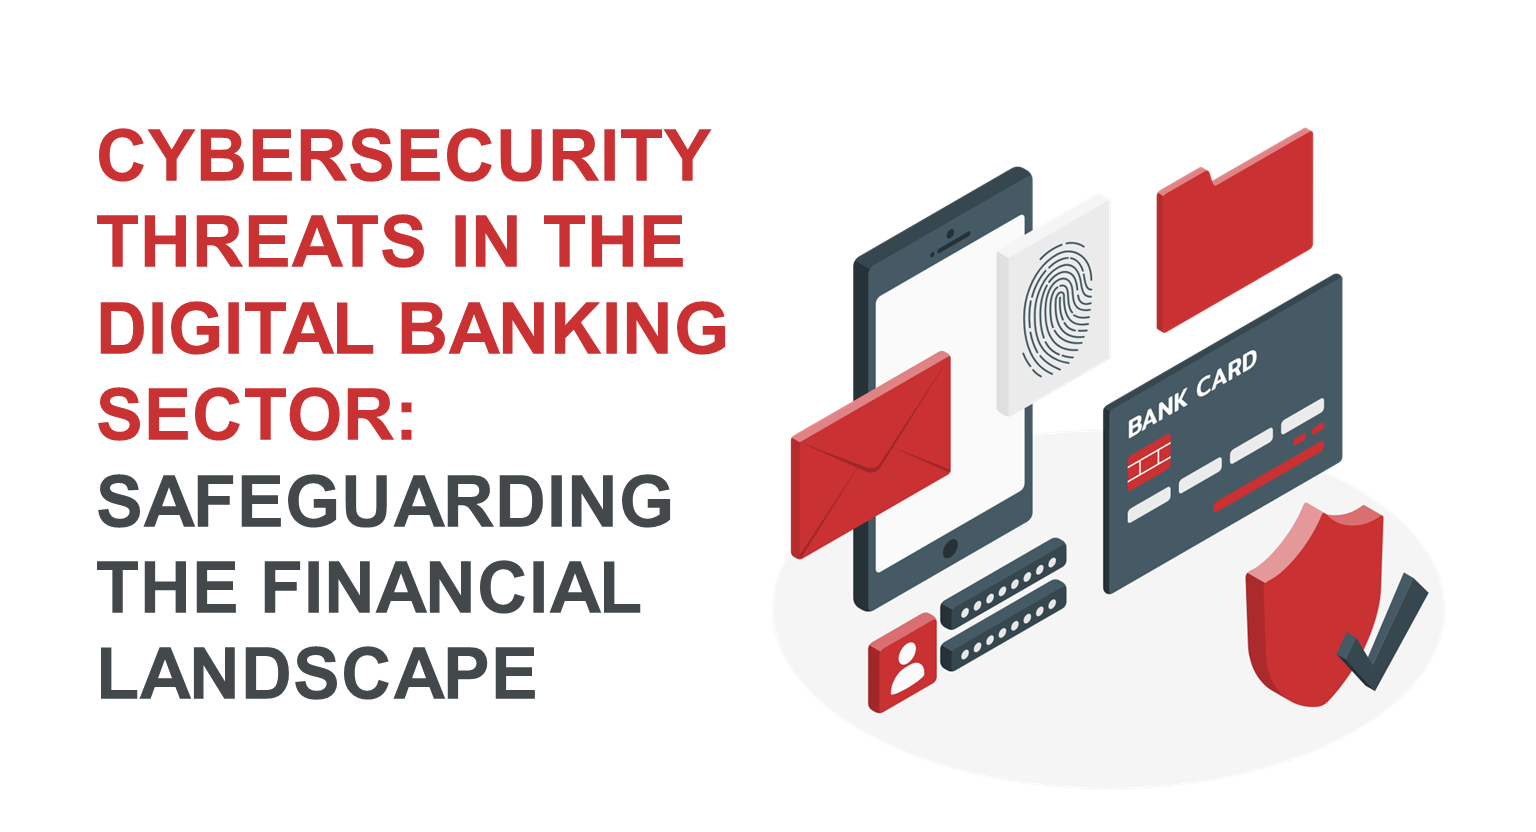 Cybersecurity Threats in the Digital Banking Sector: Safeguarding the Financial Landscape